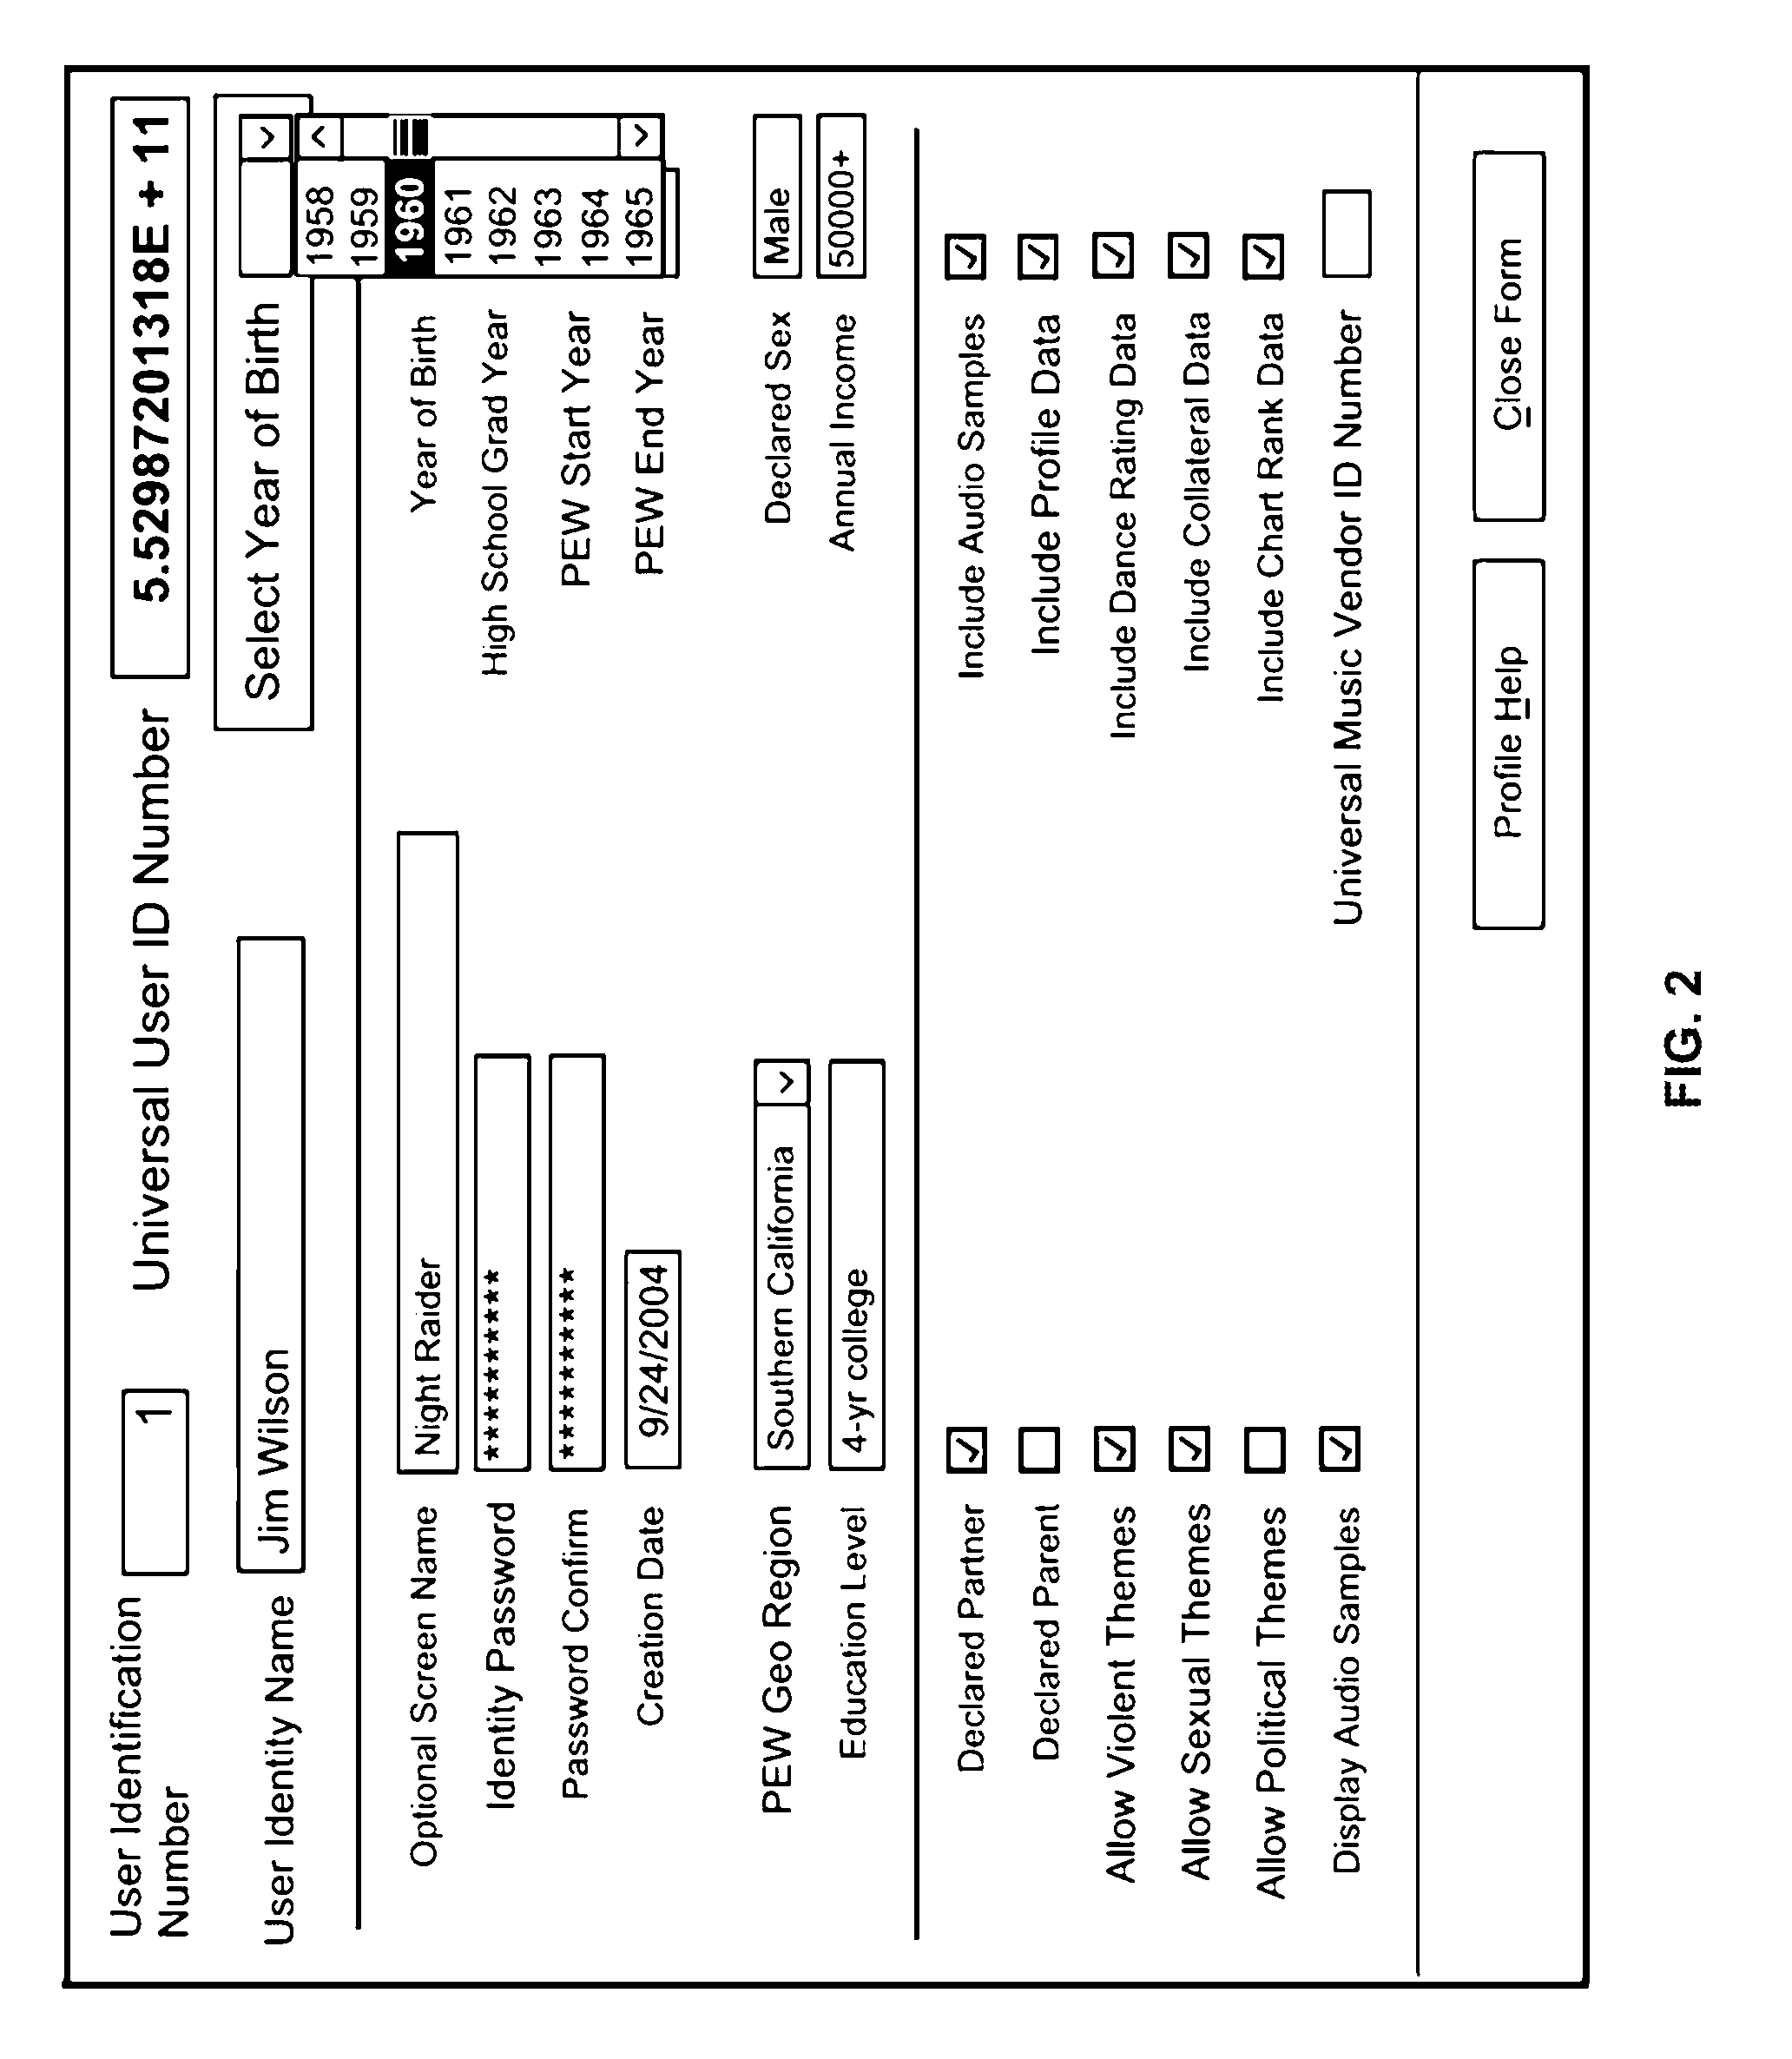 Scalable system and method for predicting hit music preferences for an individual